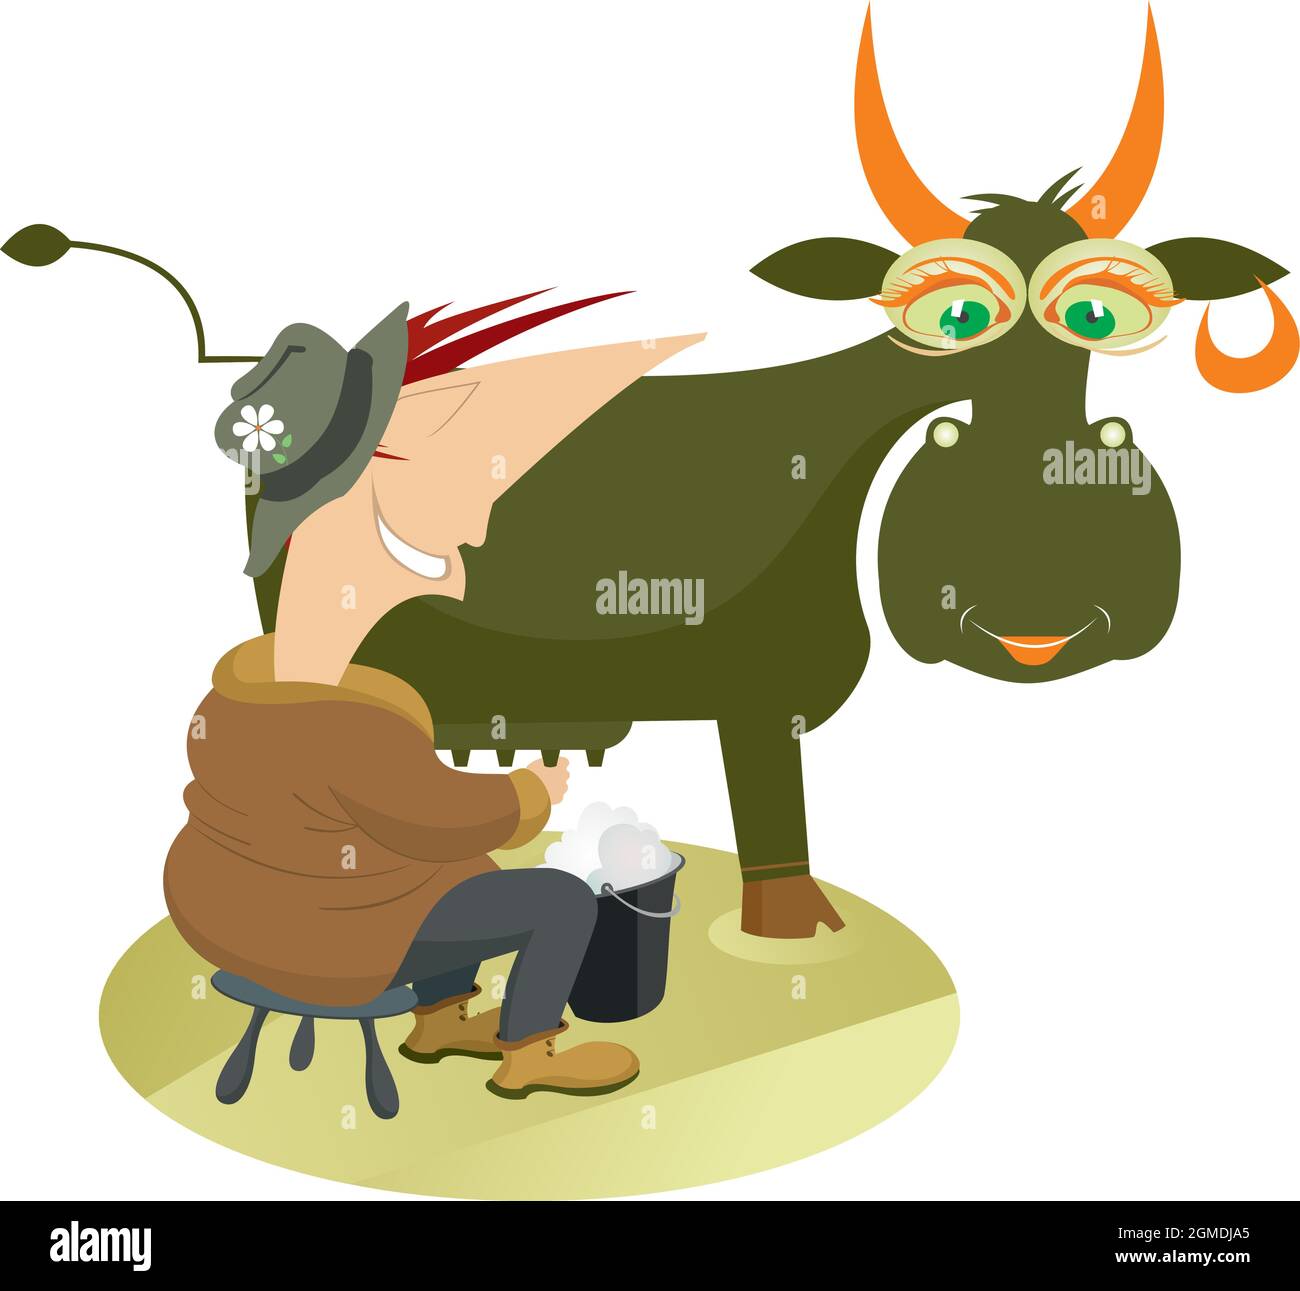 Happy cow illustration while the farmer milking - Edible Cake